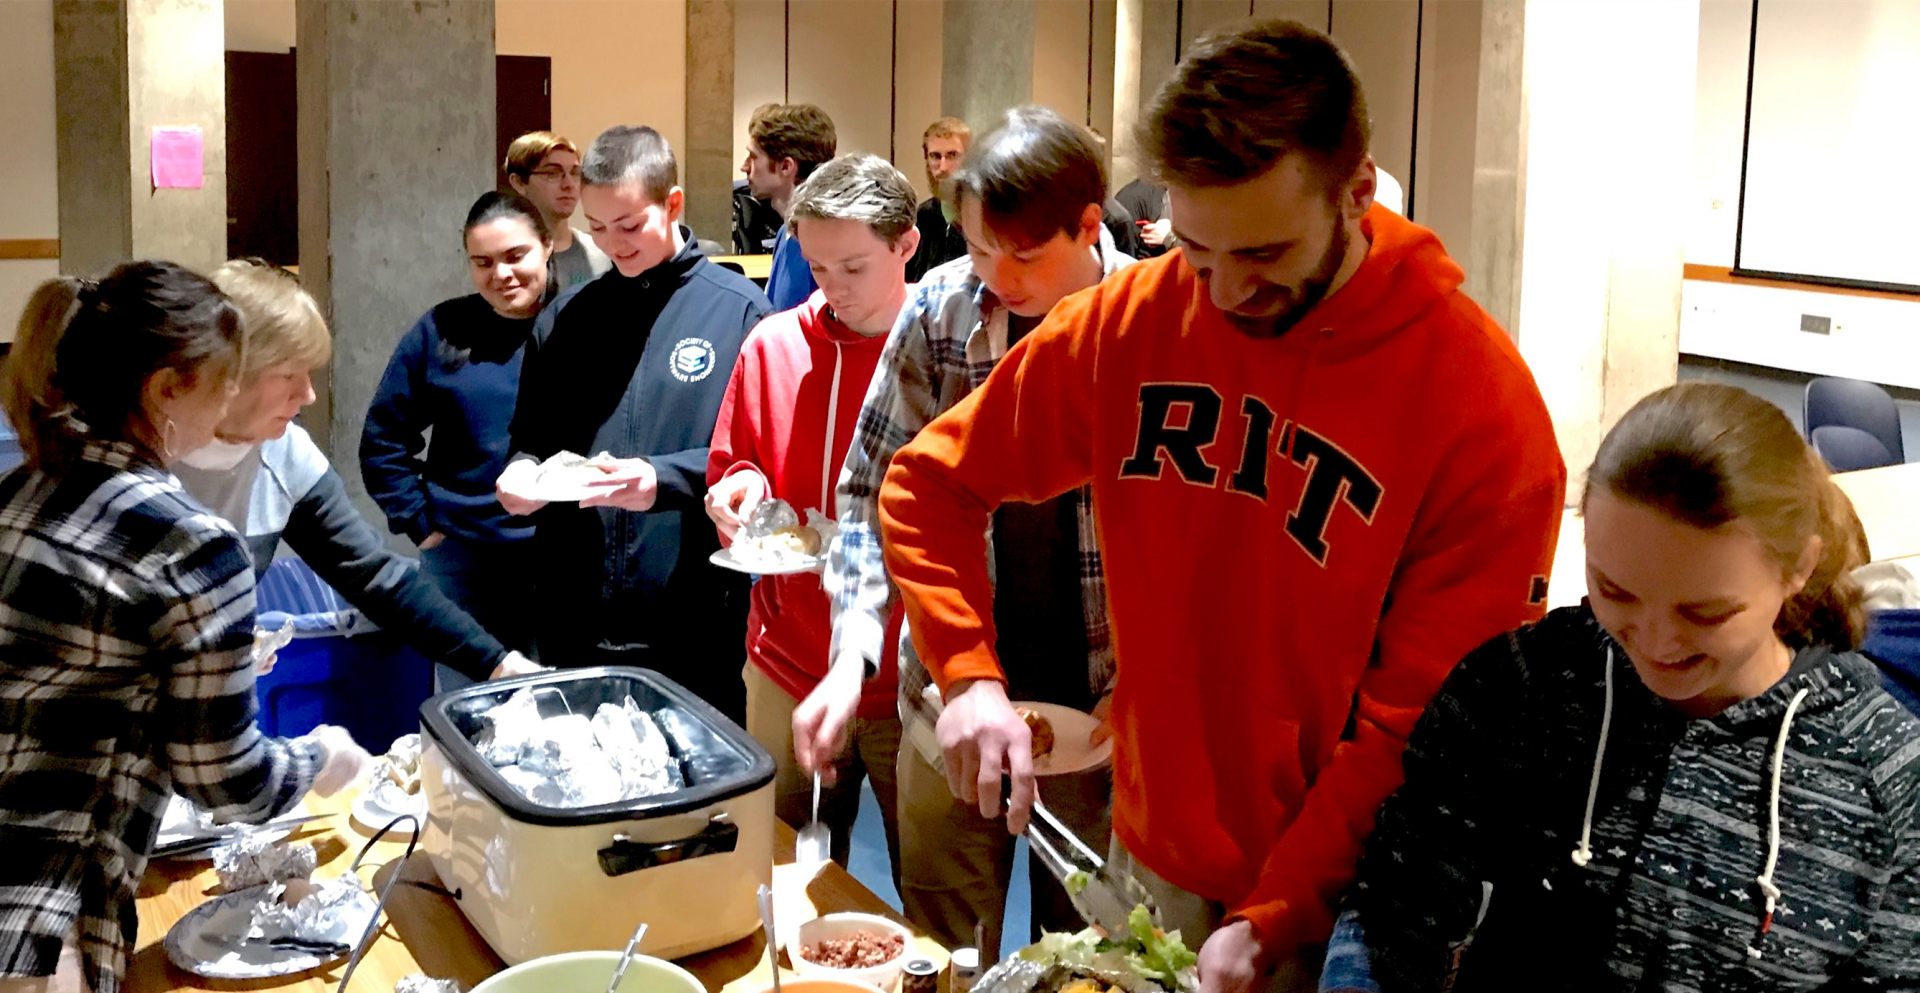 A photo of people standing in line for food. They are wearing a variety of hoodies and sweaters, everyone is smiling.